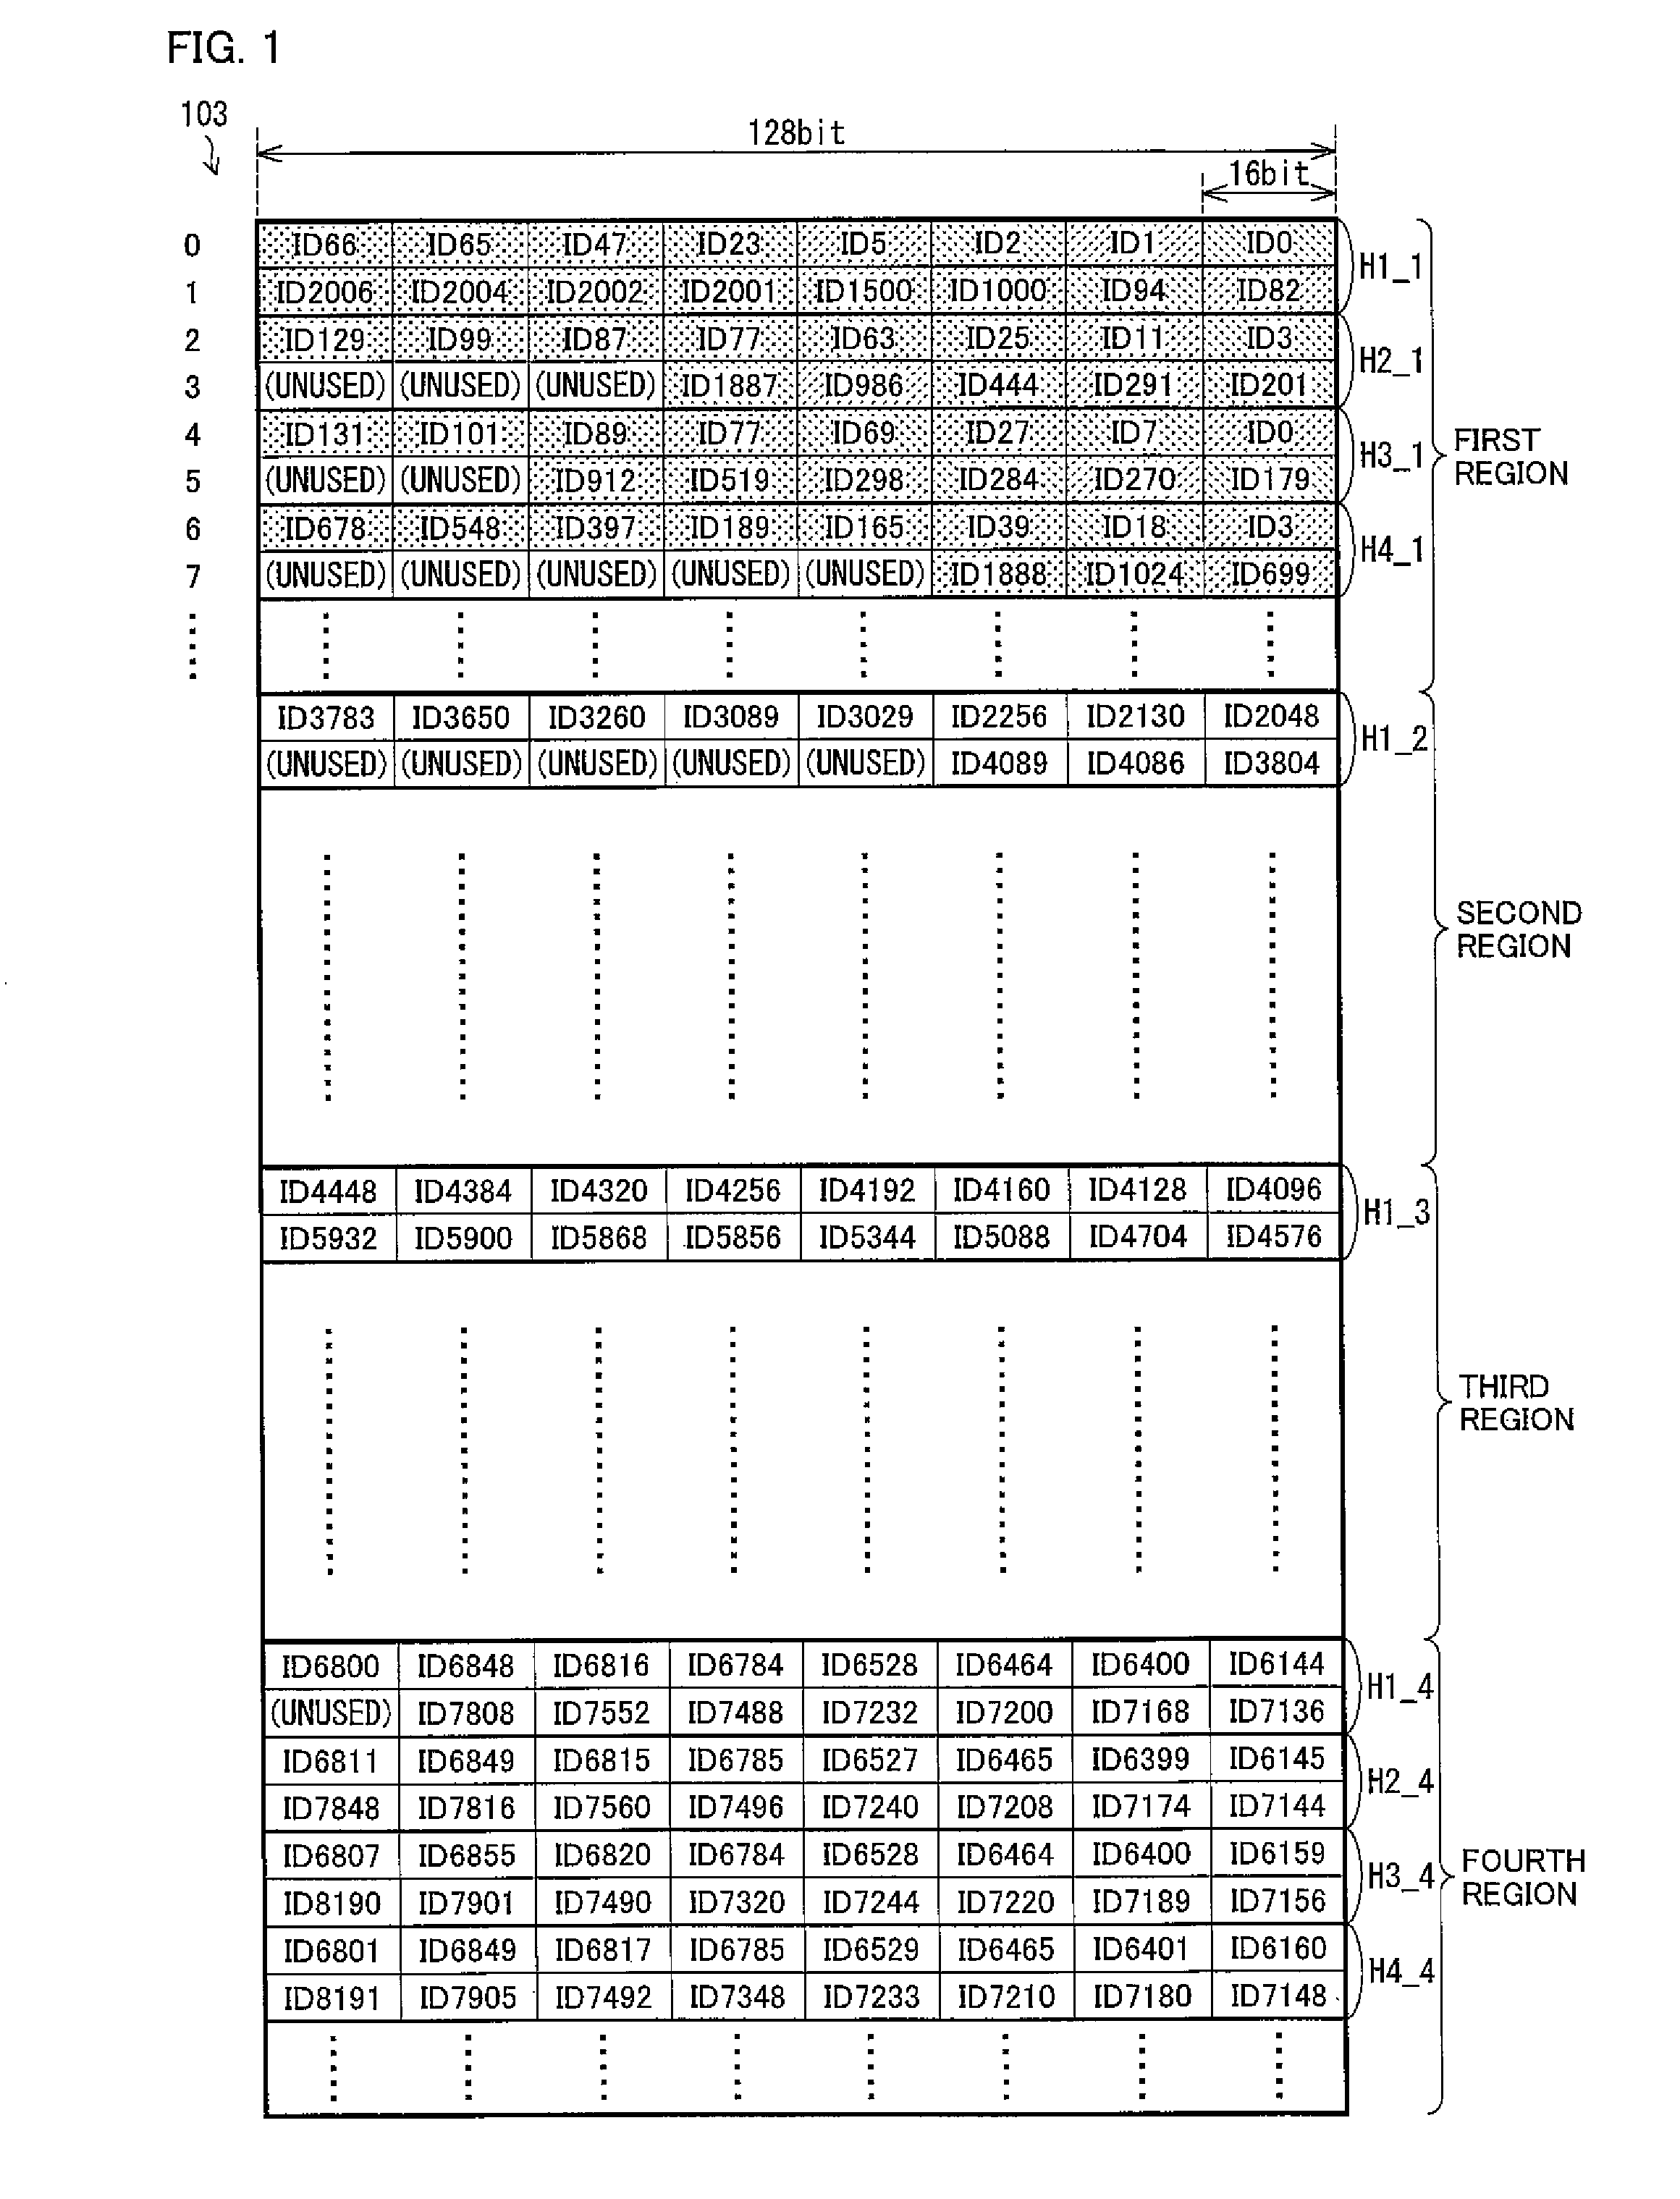 Image processing apparatus, image forming apparatus, image processing system, and image processing method having storage section, divided into a plurality of regions, for storing identification information for identifying reference image